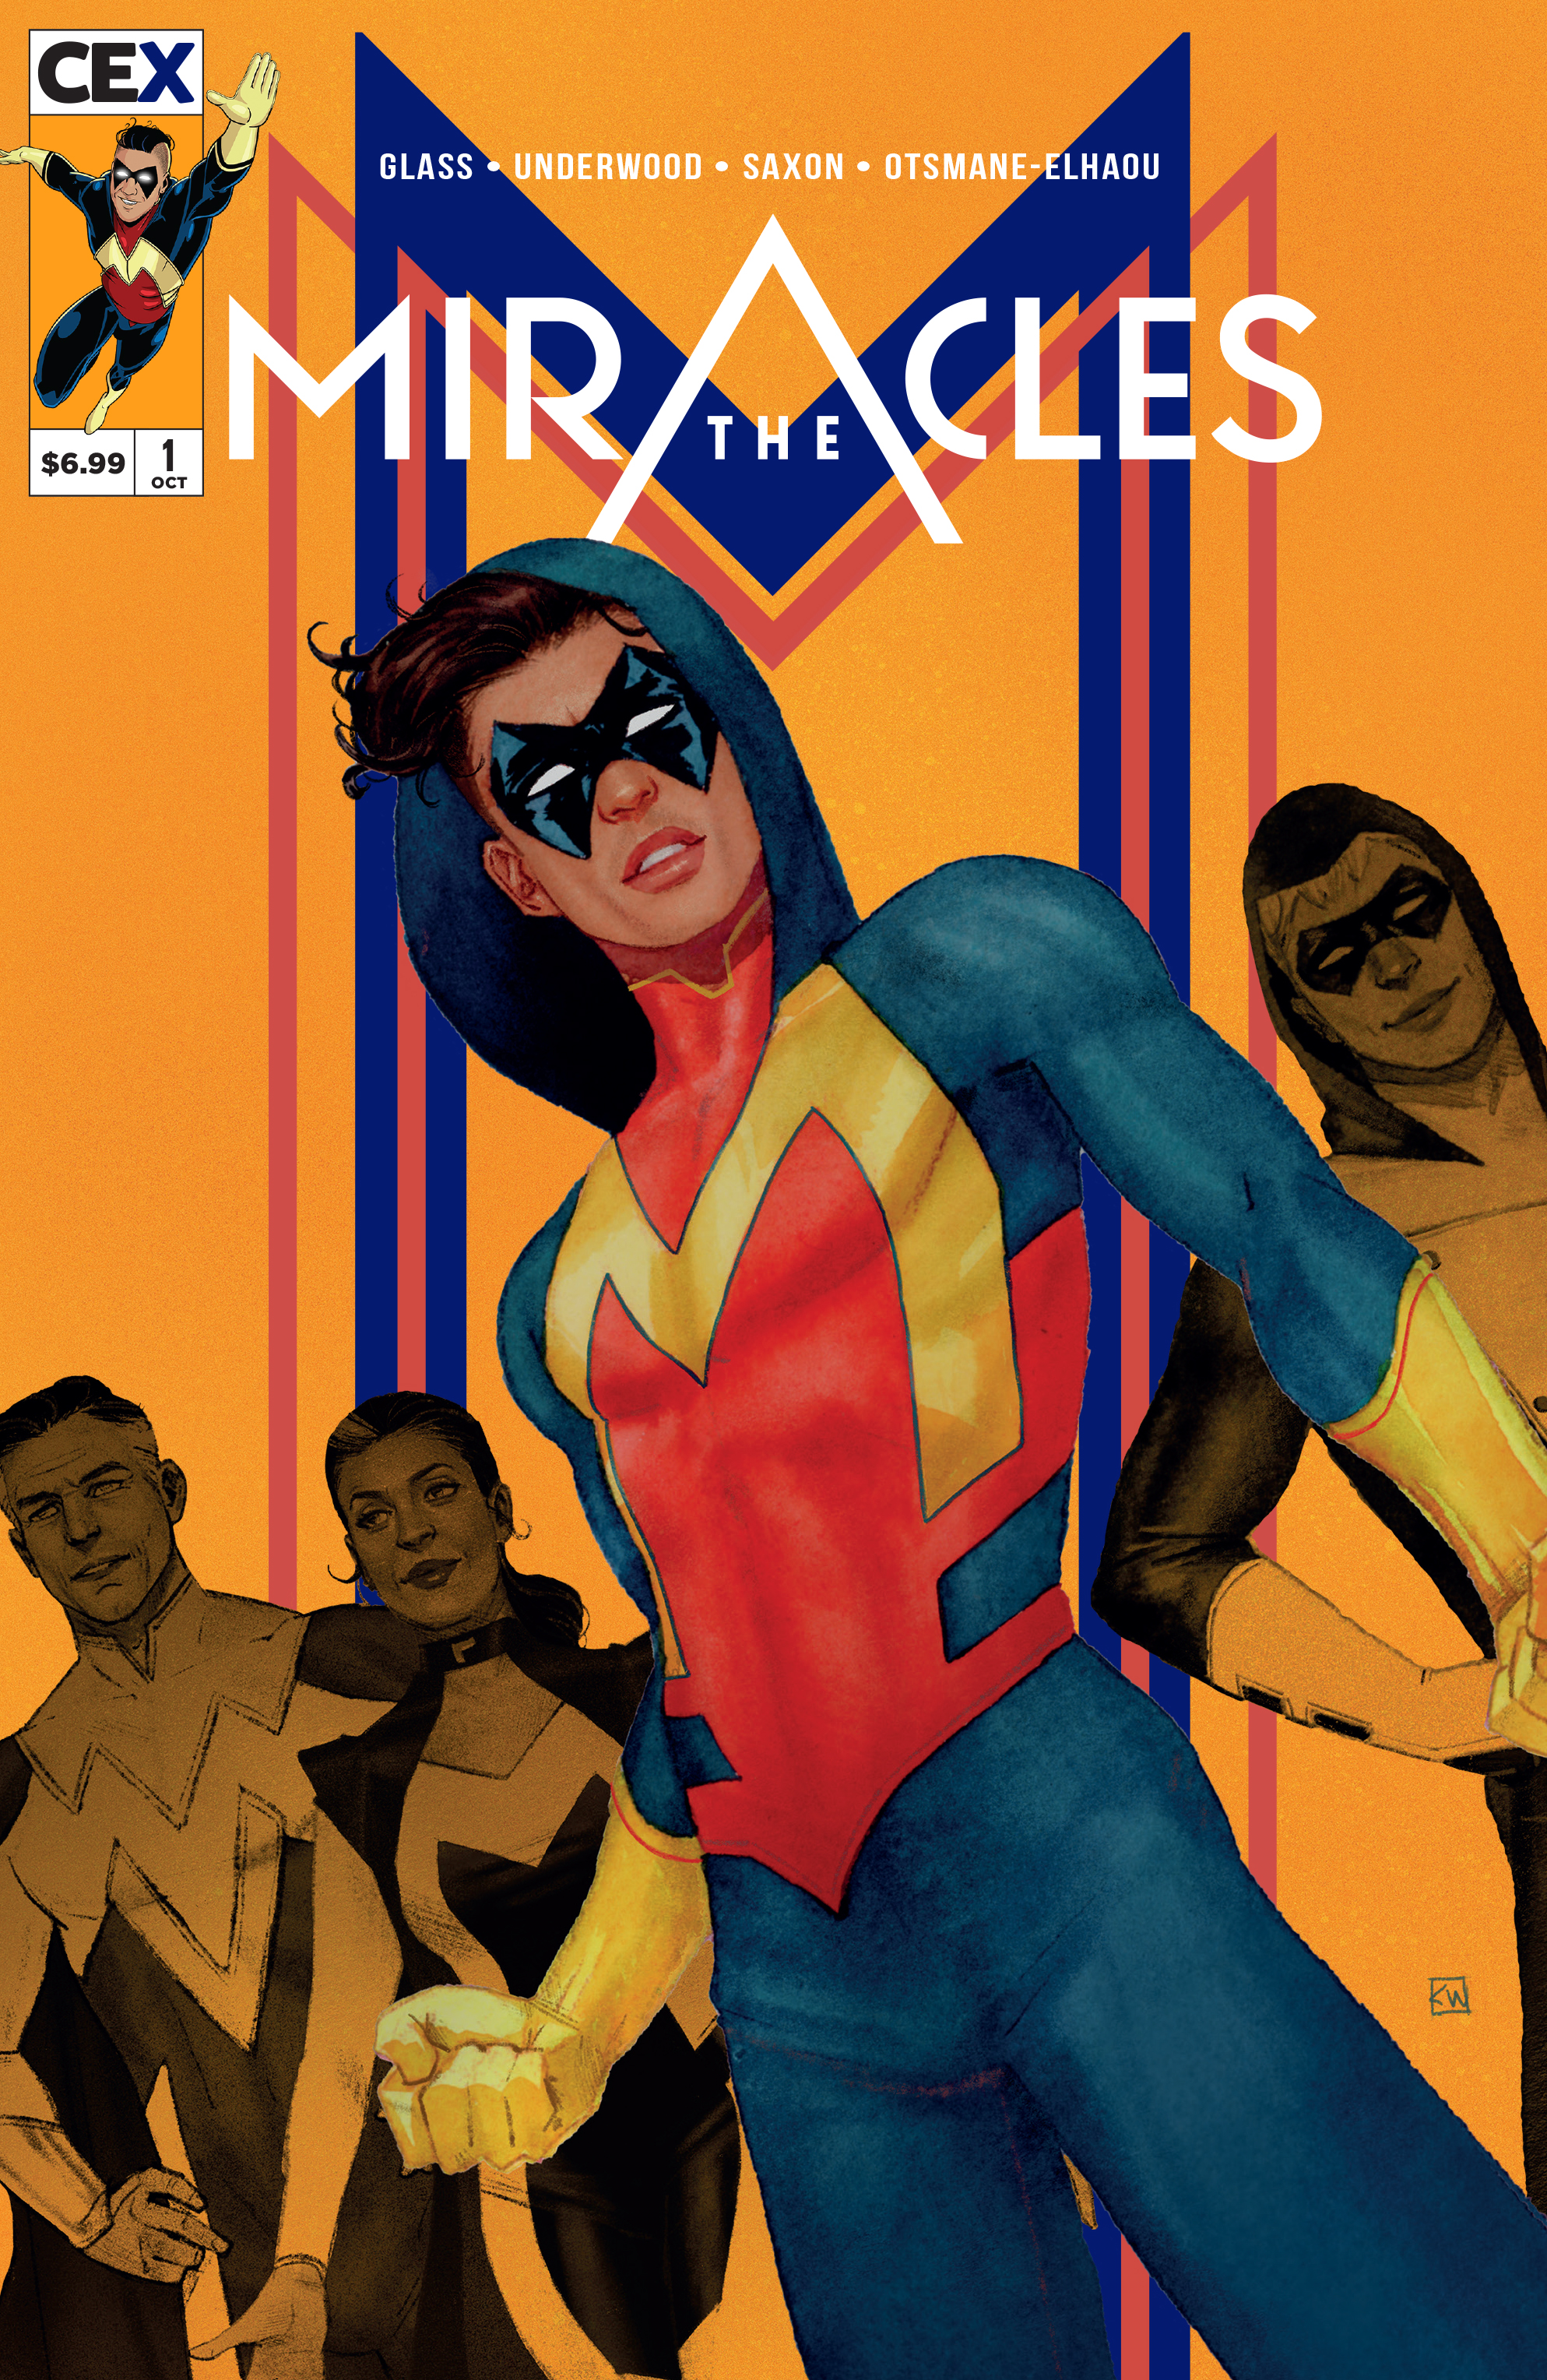 Miracles #1 Cover C Kevin Wada Variant (Of 4)